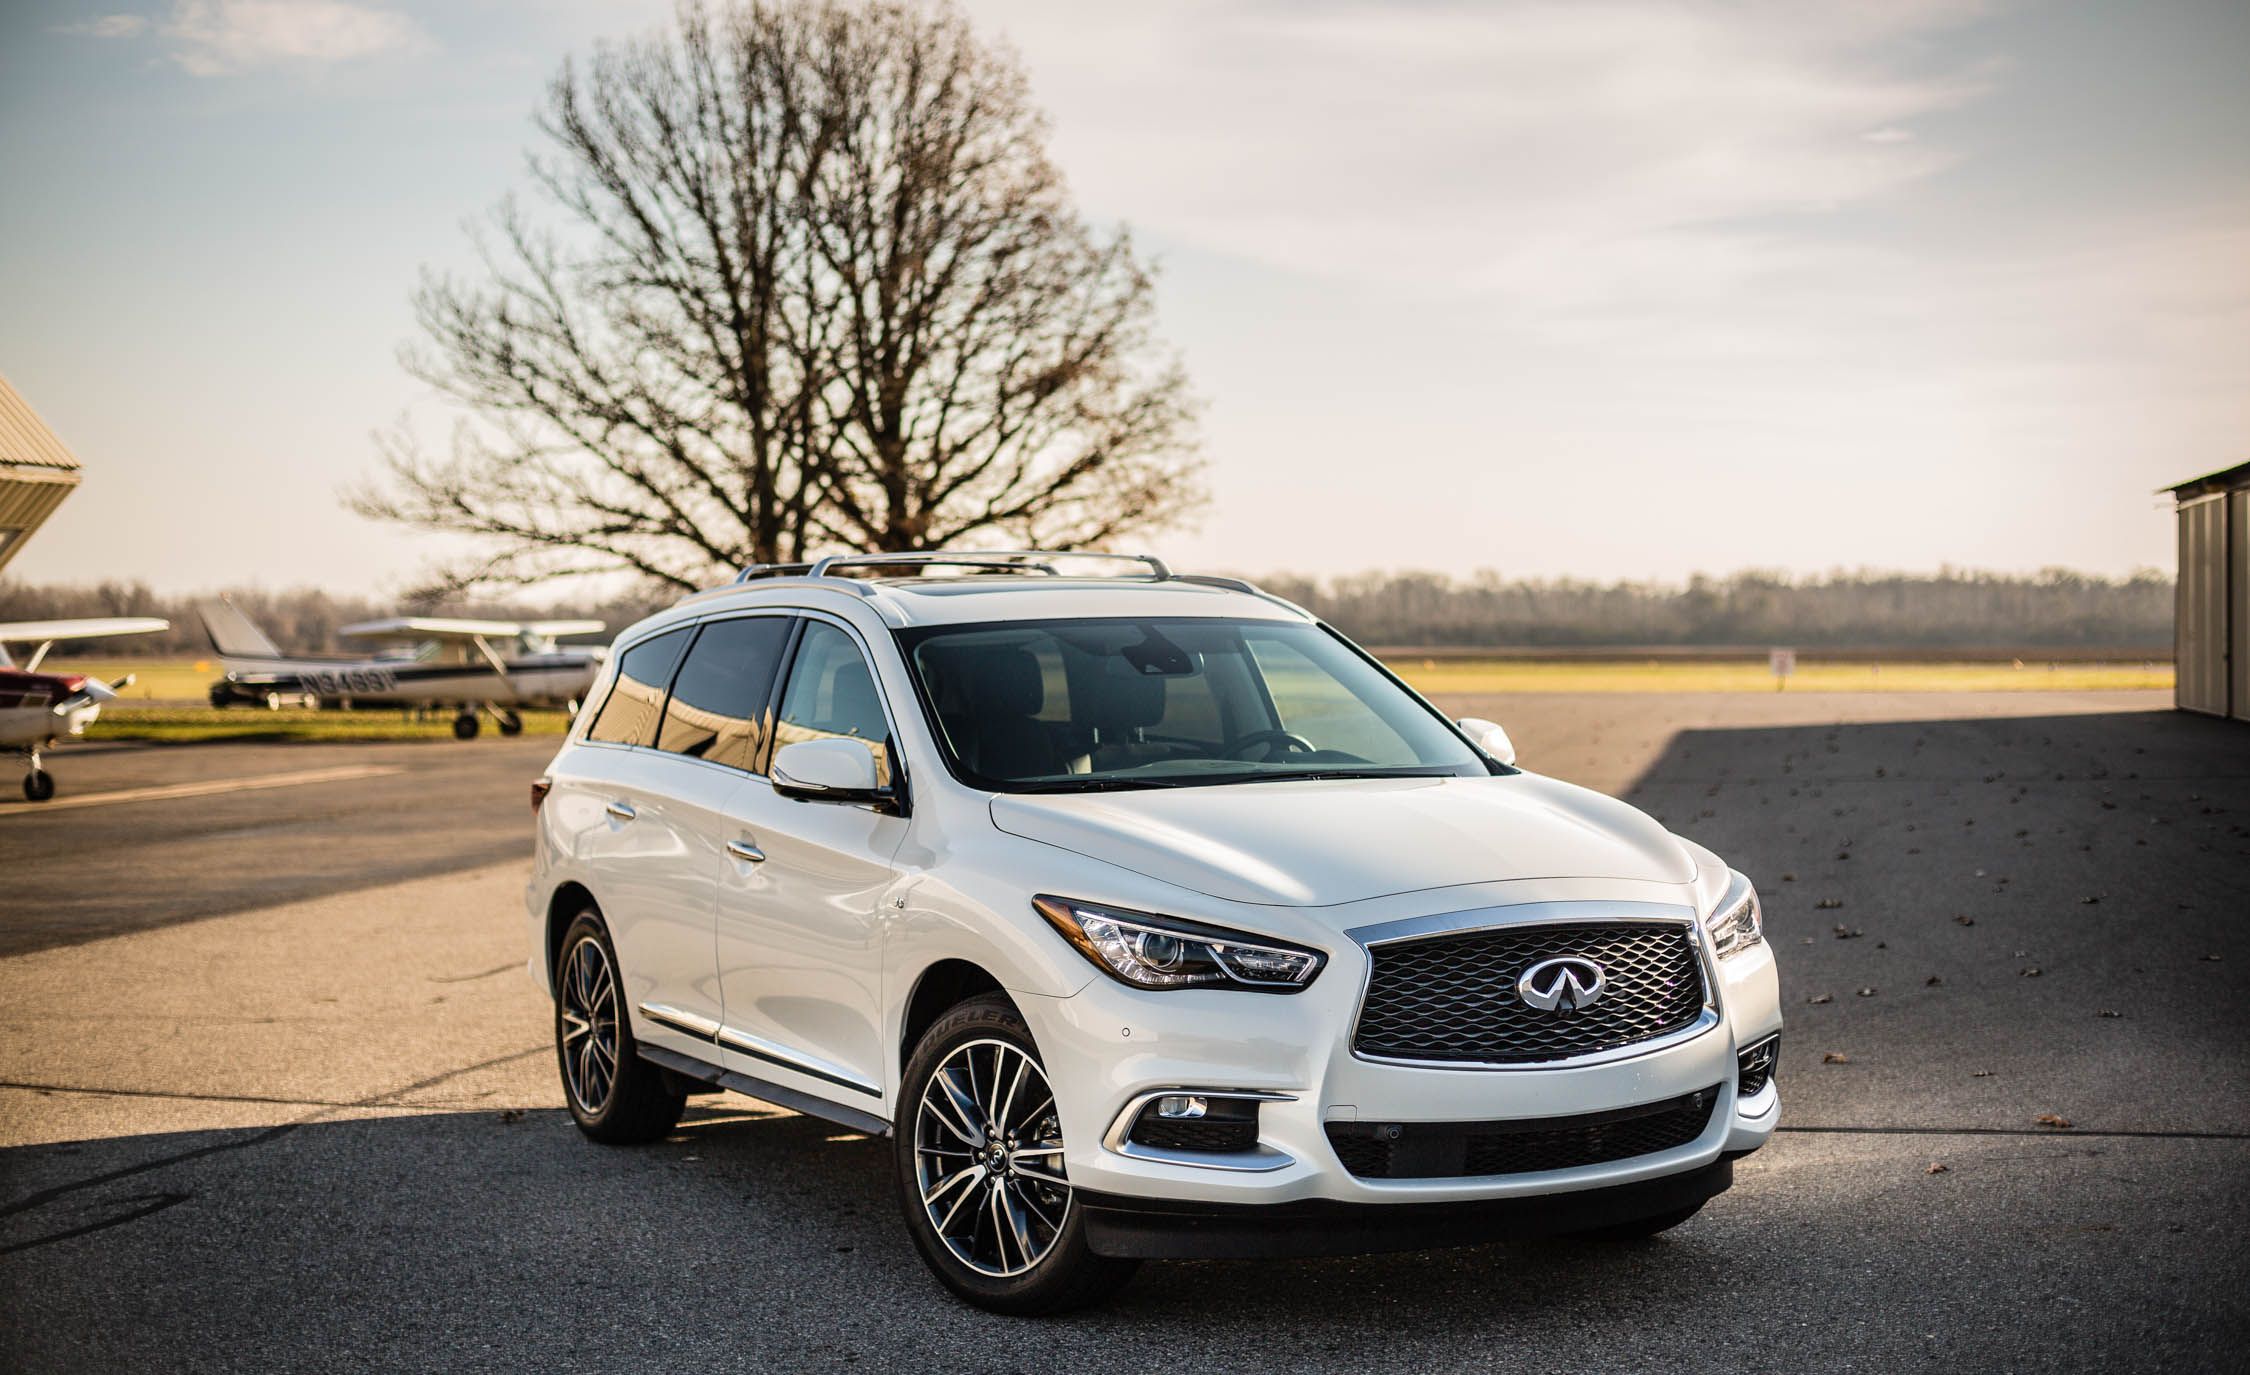 2017 Infiniti QX60 Review, Pricing, and Specs